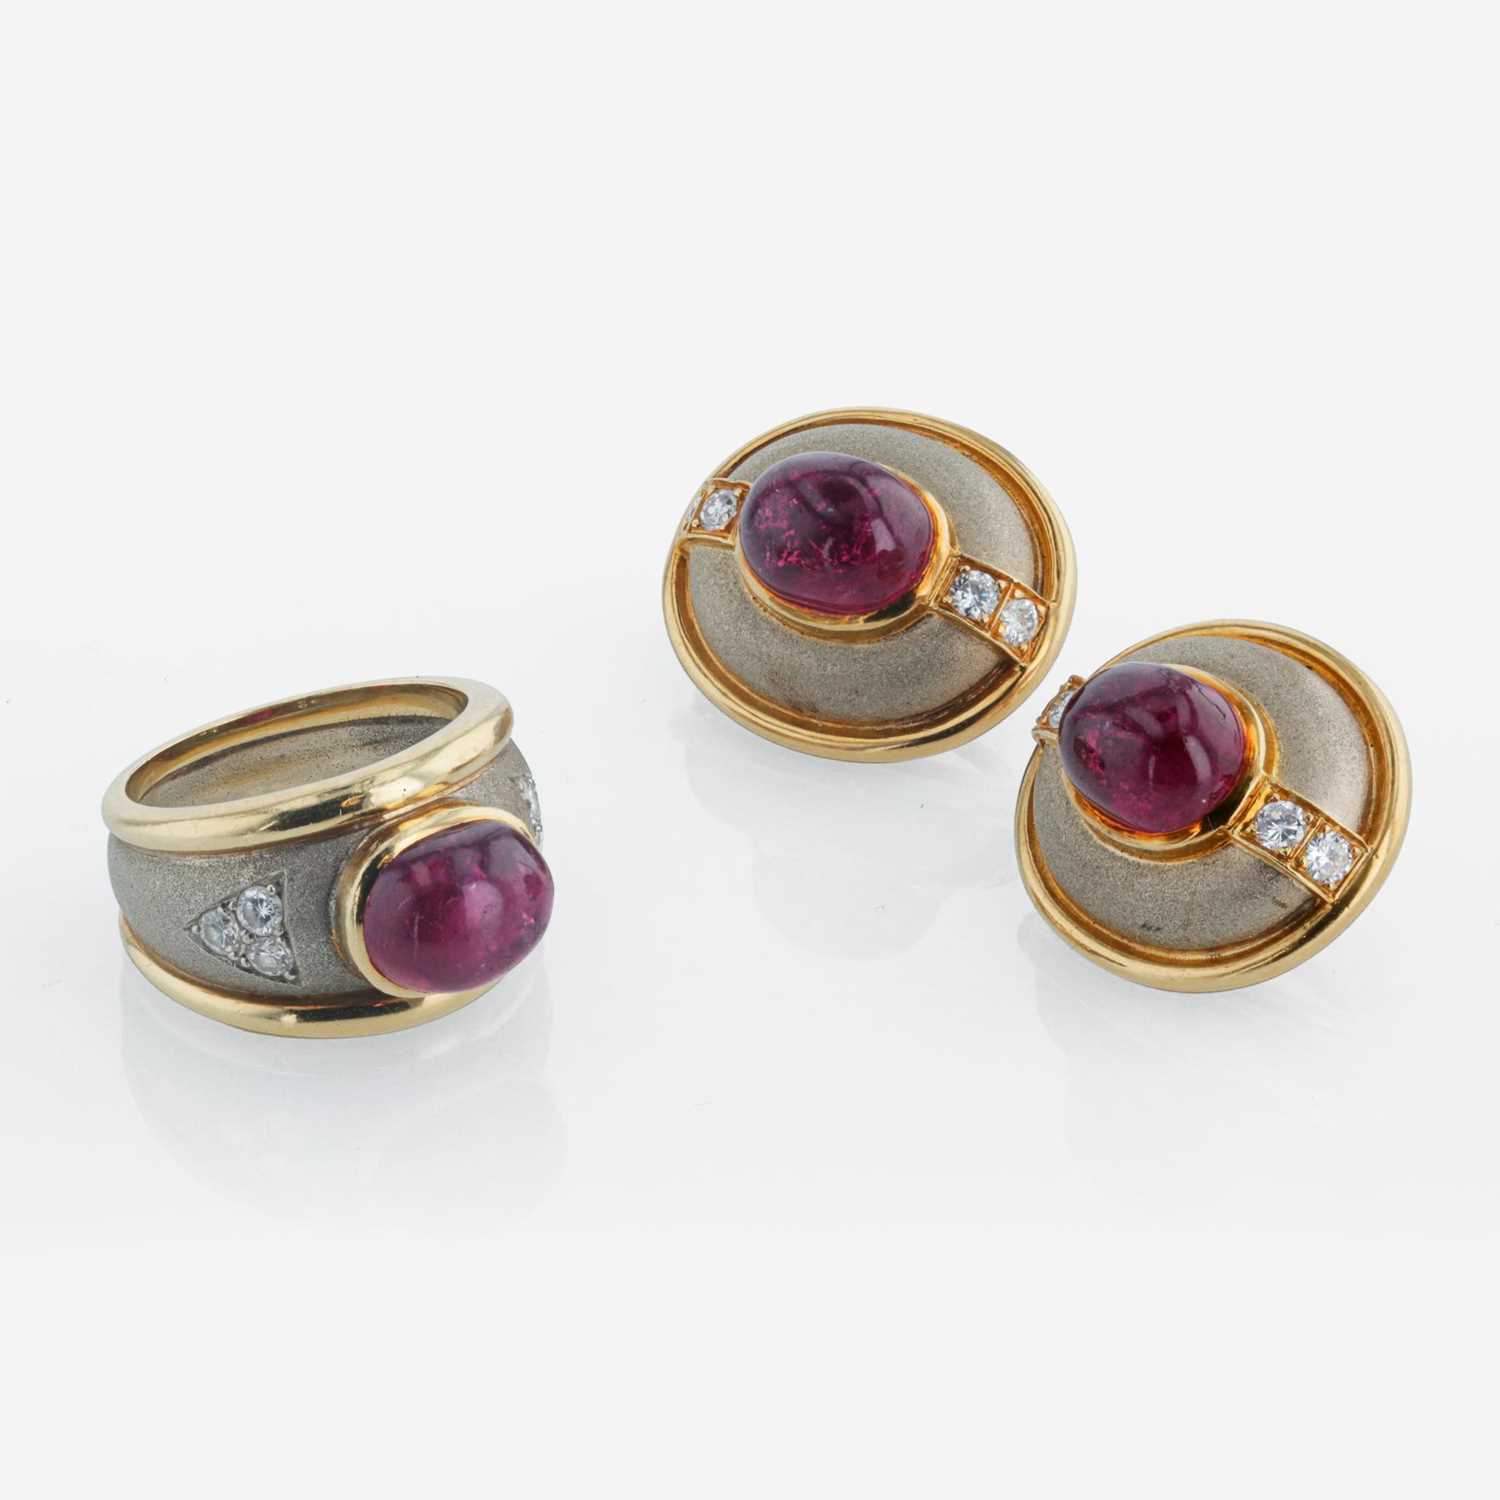 Lot 92 - A pair of 18K bicolor gold earrings with matching ring, LLBA